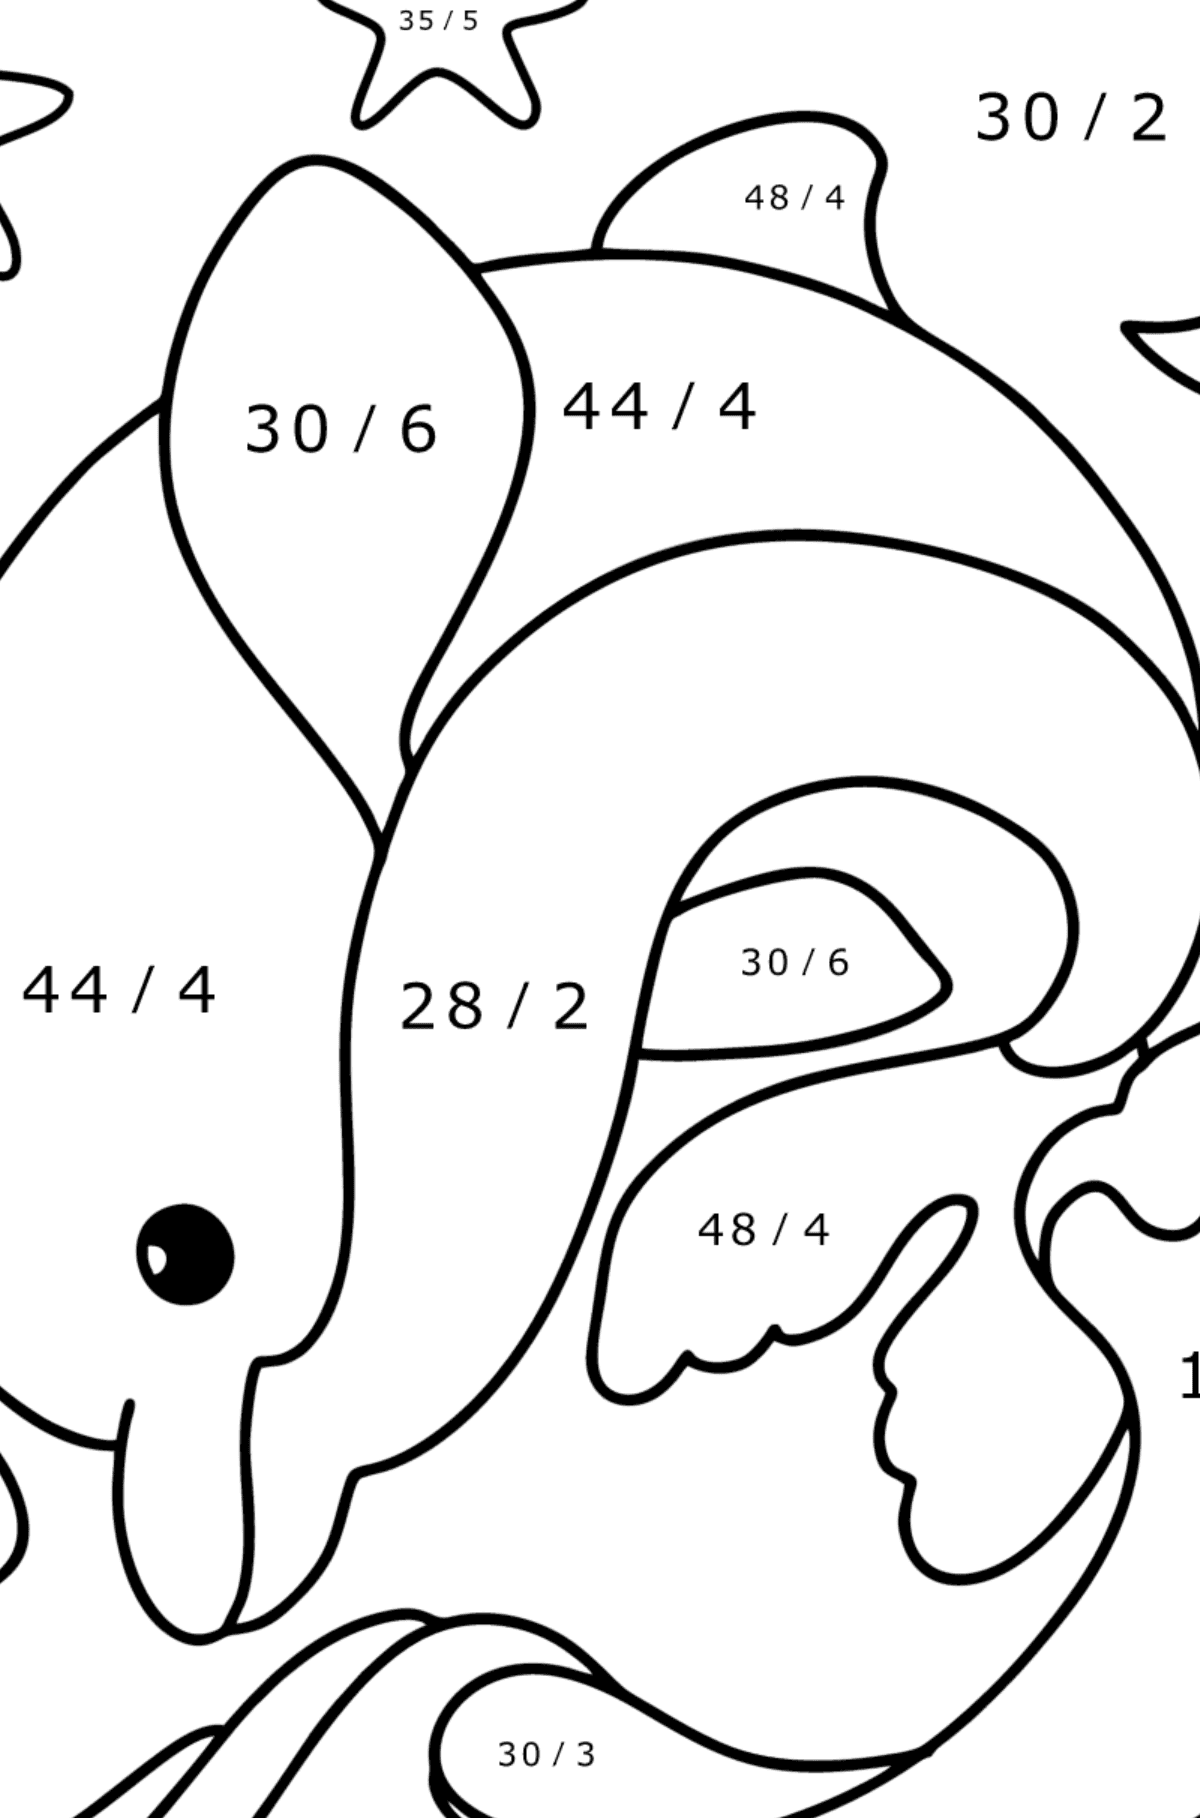 Dolphin in the Sea coloring page - Math Coloring - Division for Kids